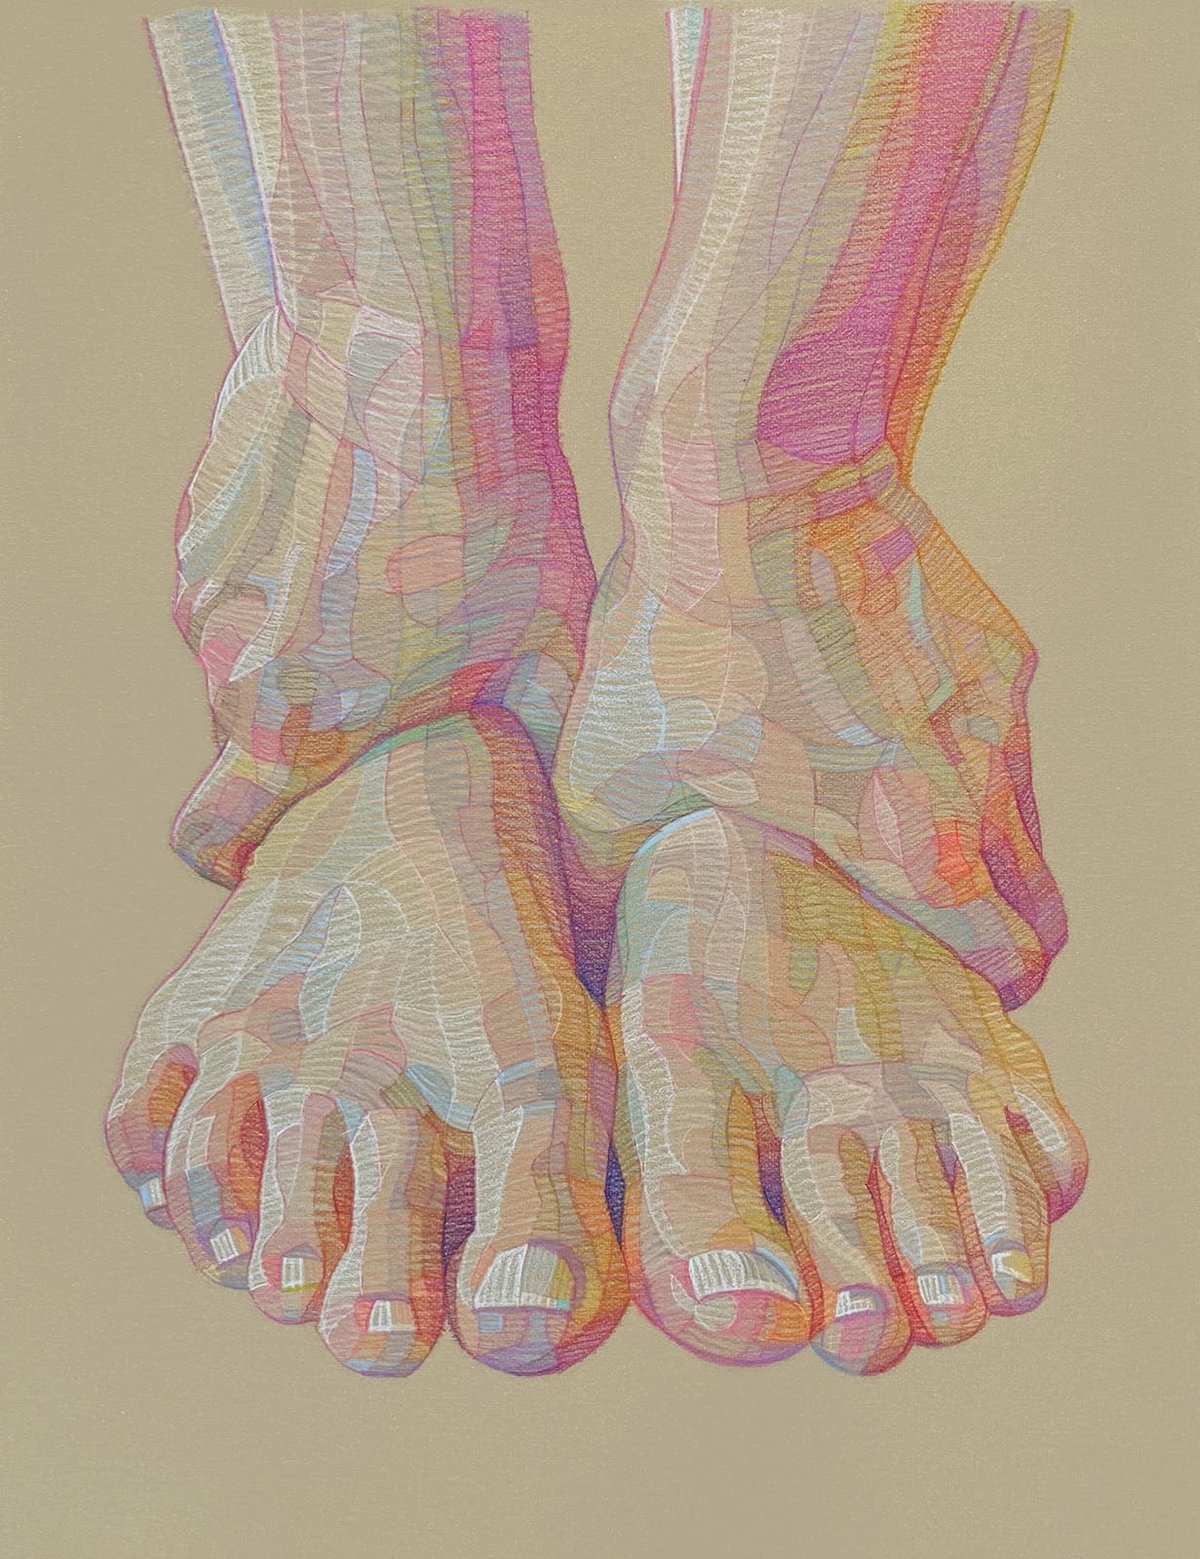 colored pencil drawing of a pair of hands grabbing ankles